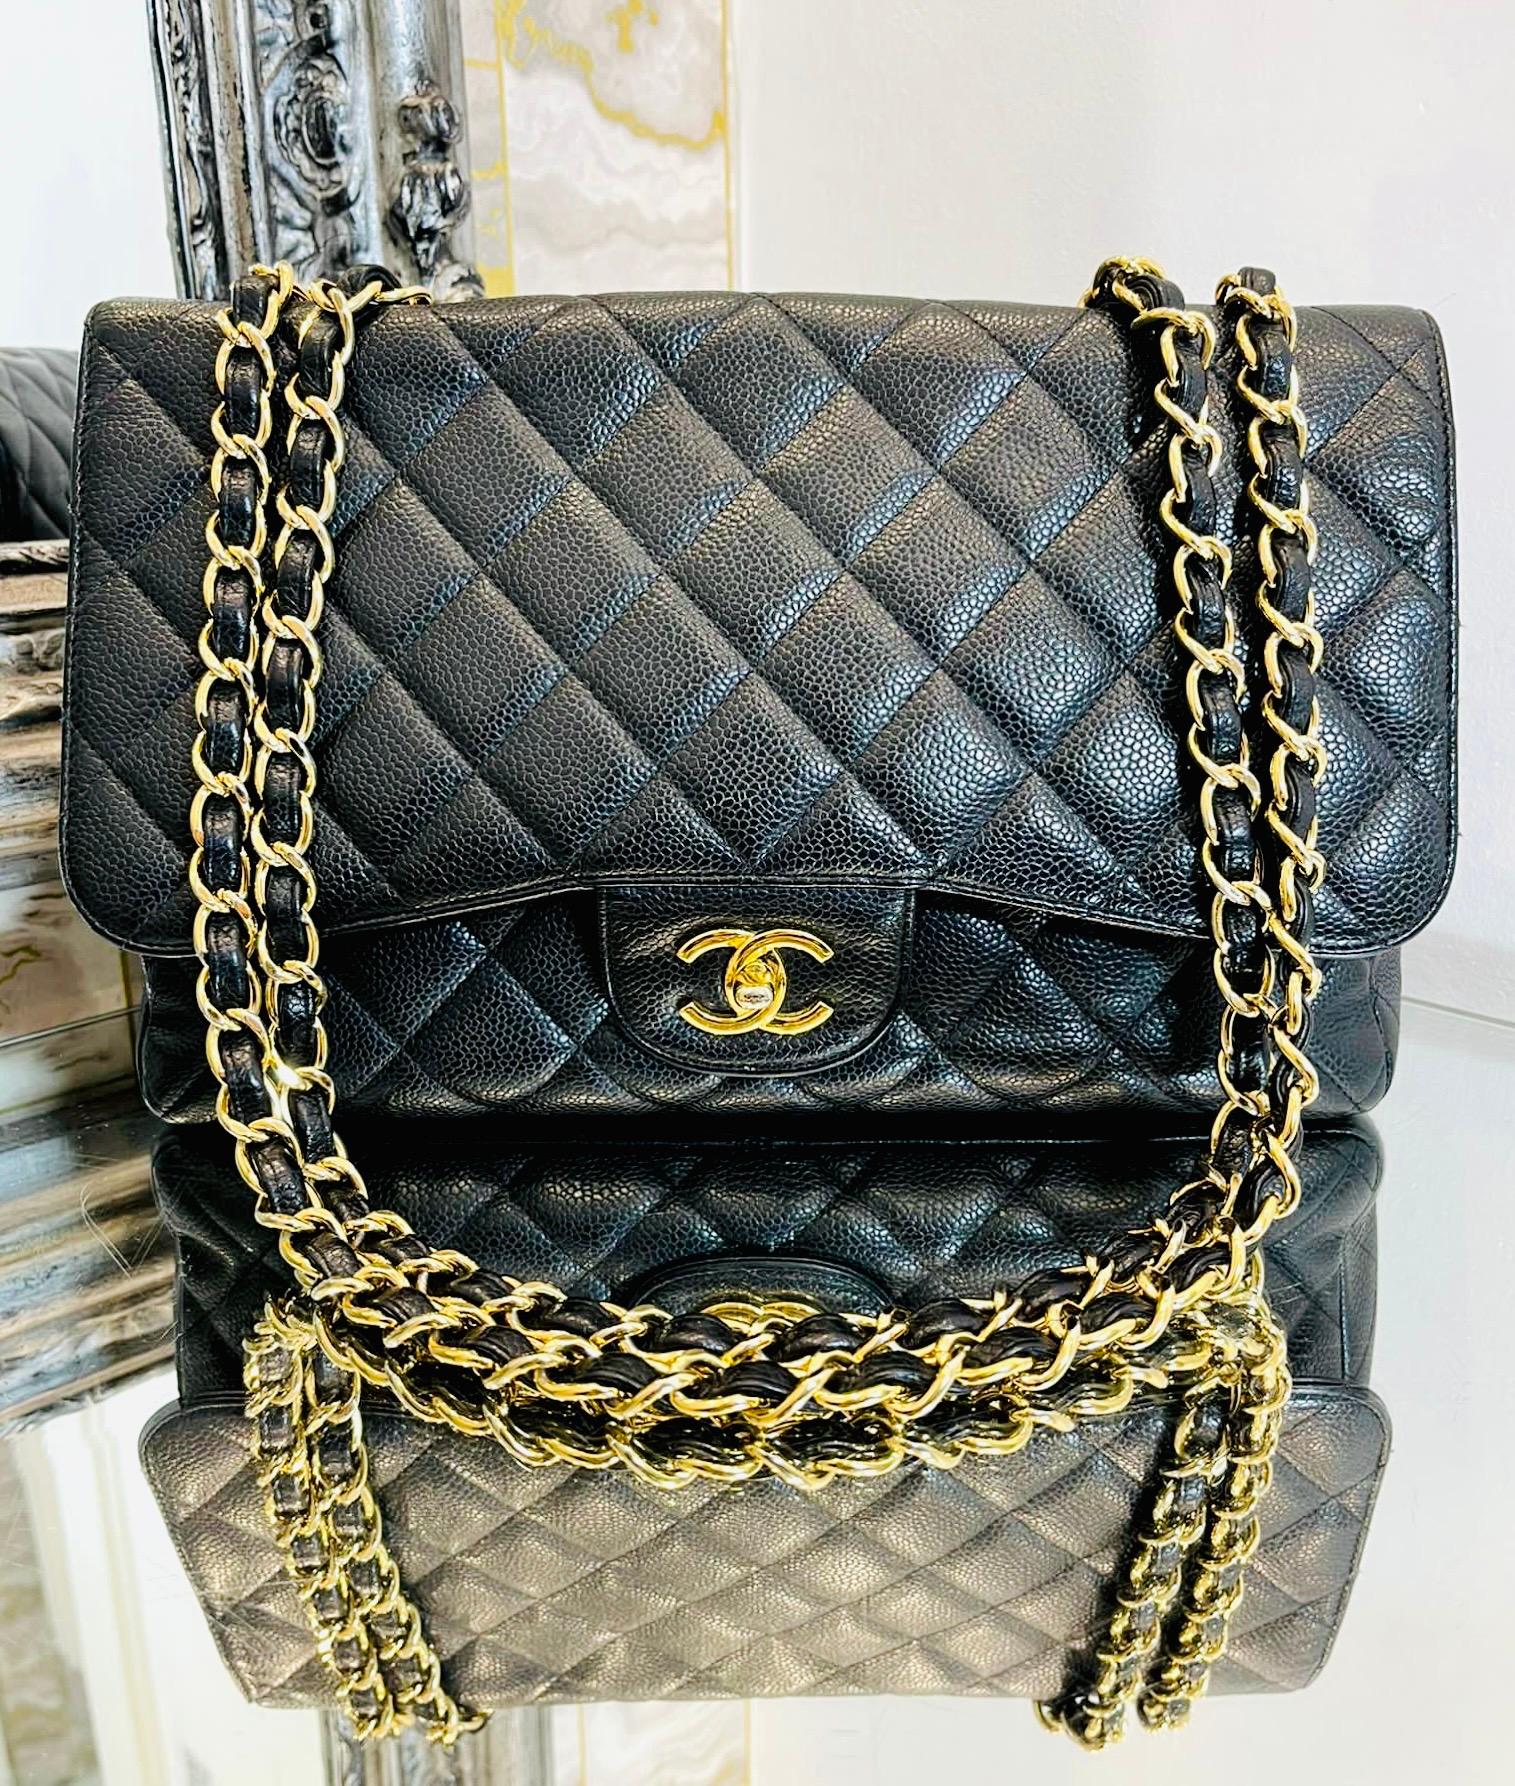 Chanel Vintage Jumbo Classic Caviar Leather Flap Bag With 24k Gold Plated Hardware

Black shoulder bag designed with iconic diamond quilting and 24k gold plated hardware.

Detailed with front flap and gold 'CC' turn-lock closure leading to leather